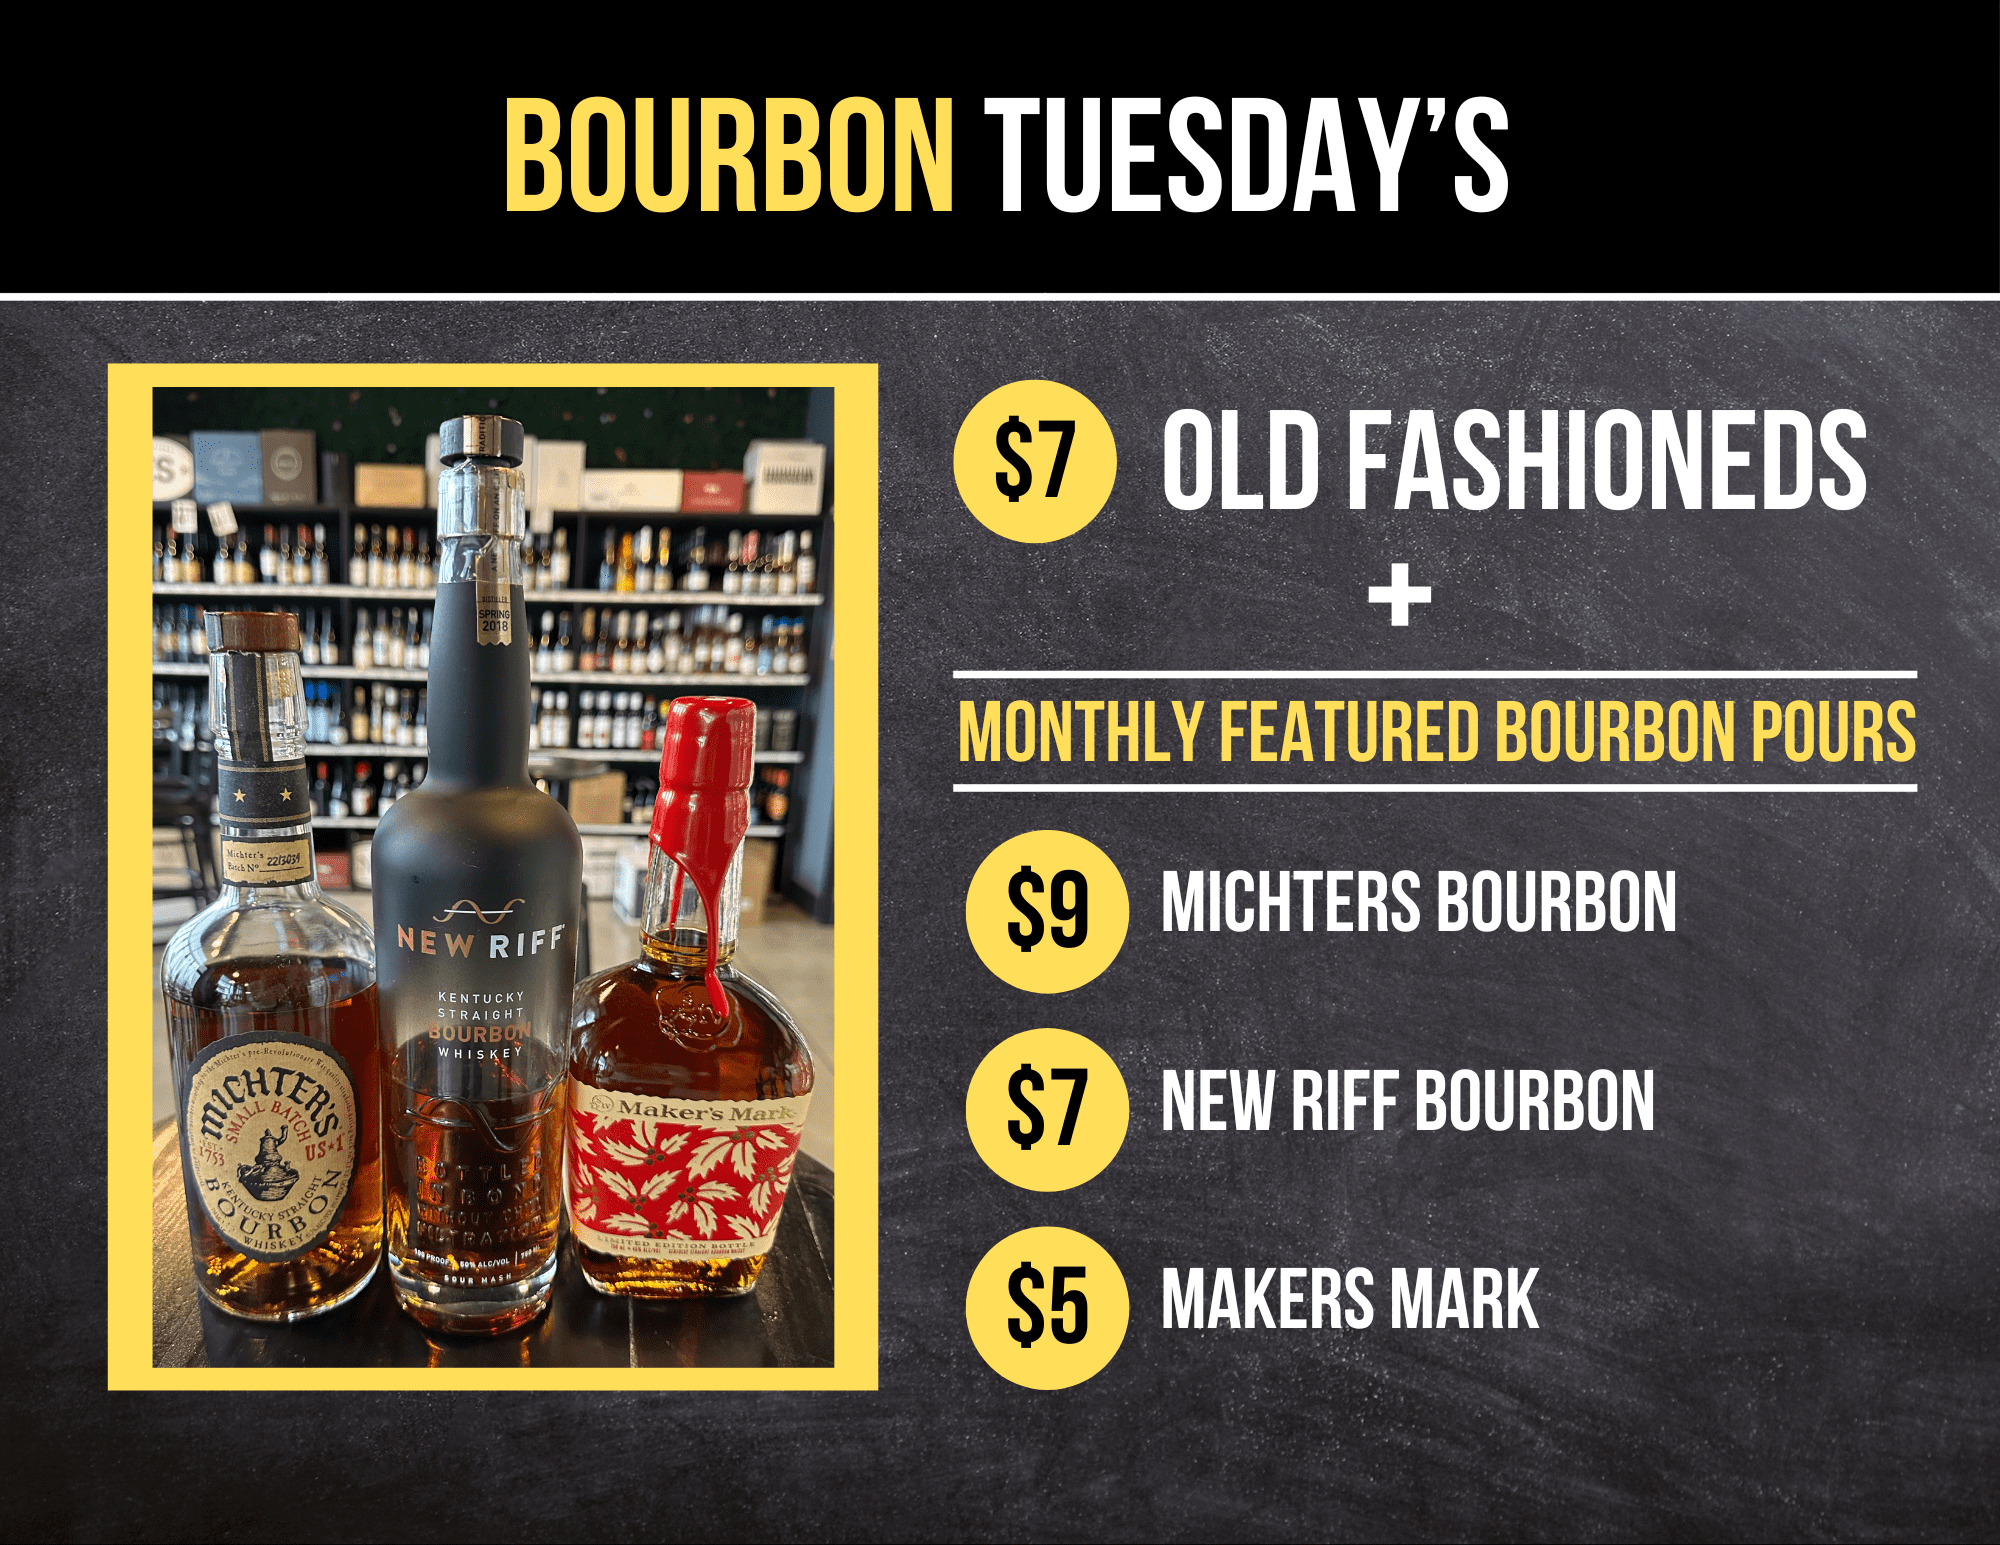 Join Higher Gravity every Tuesday for specials on rotating bourbon pours.